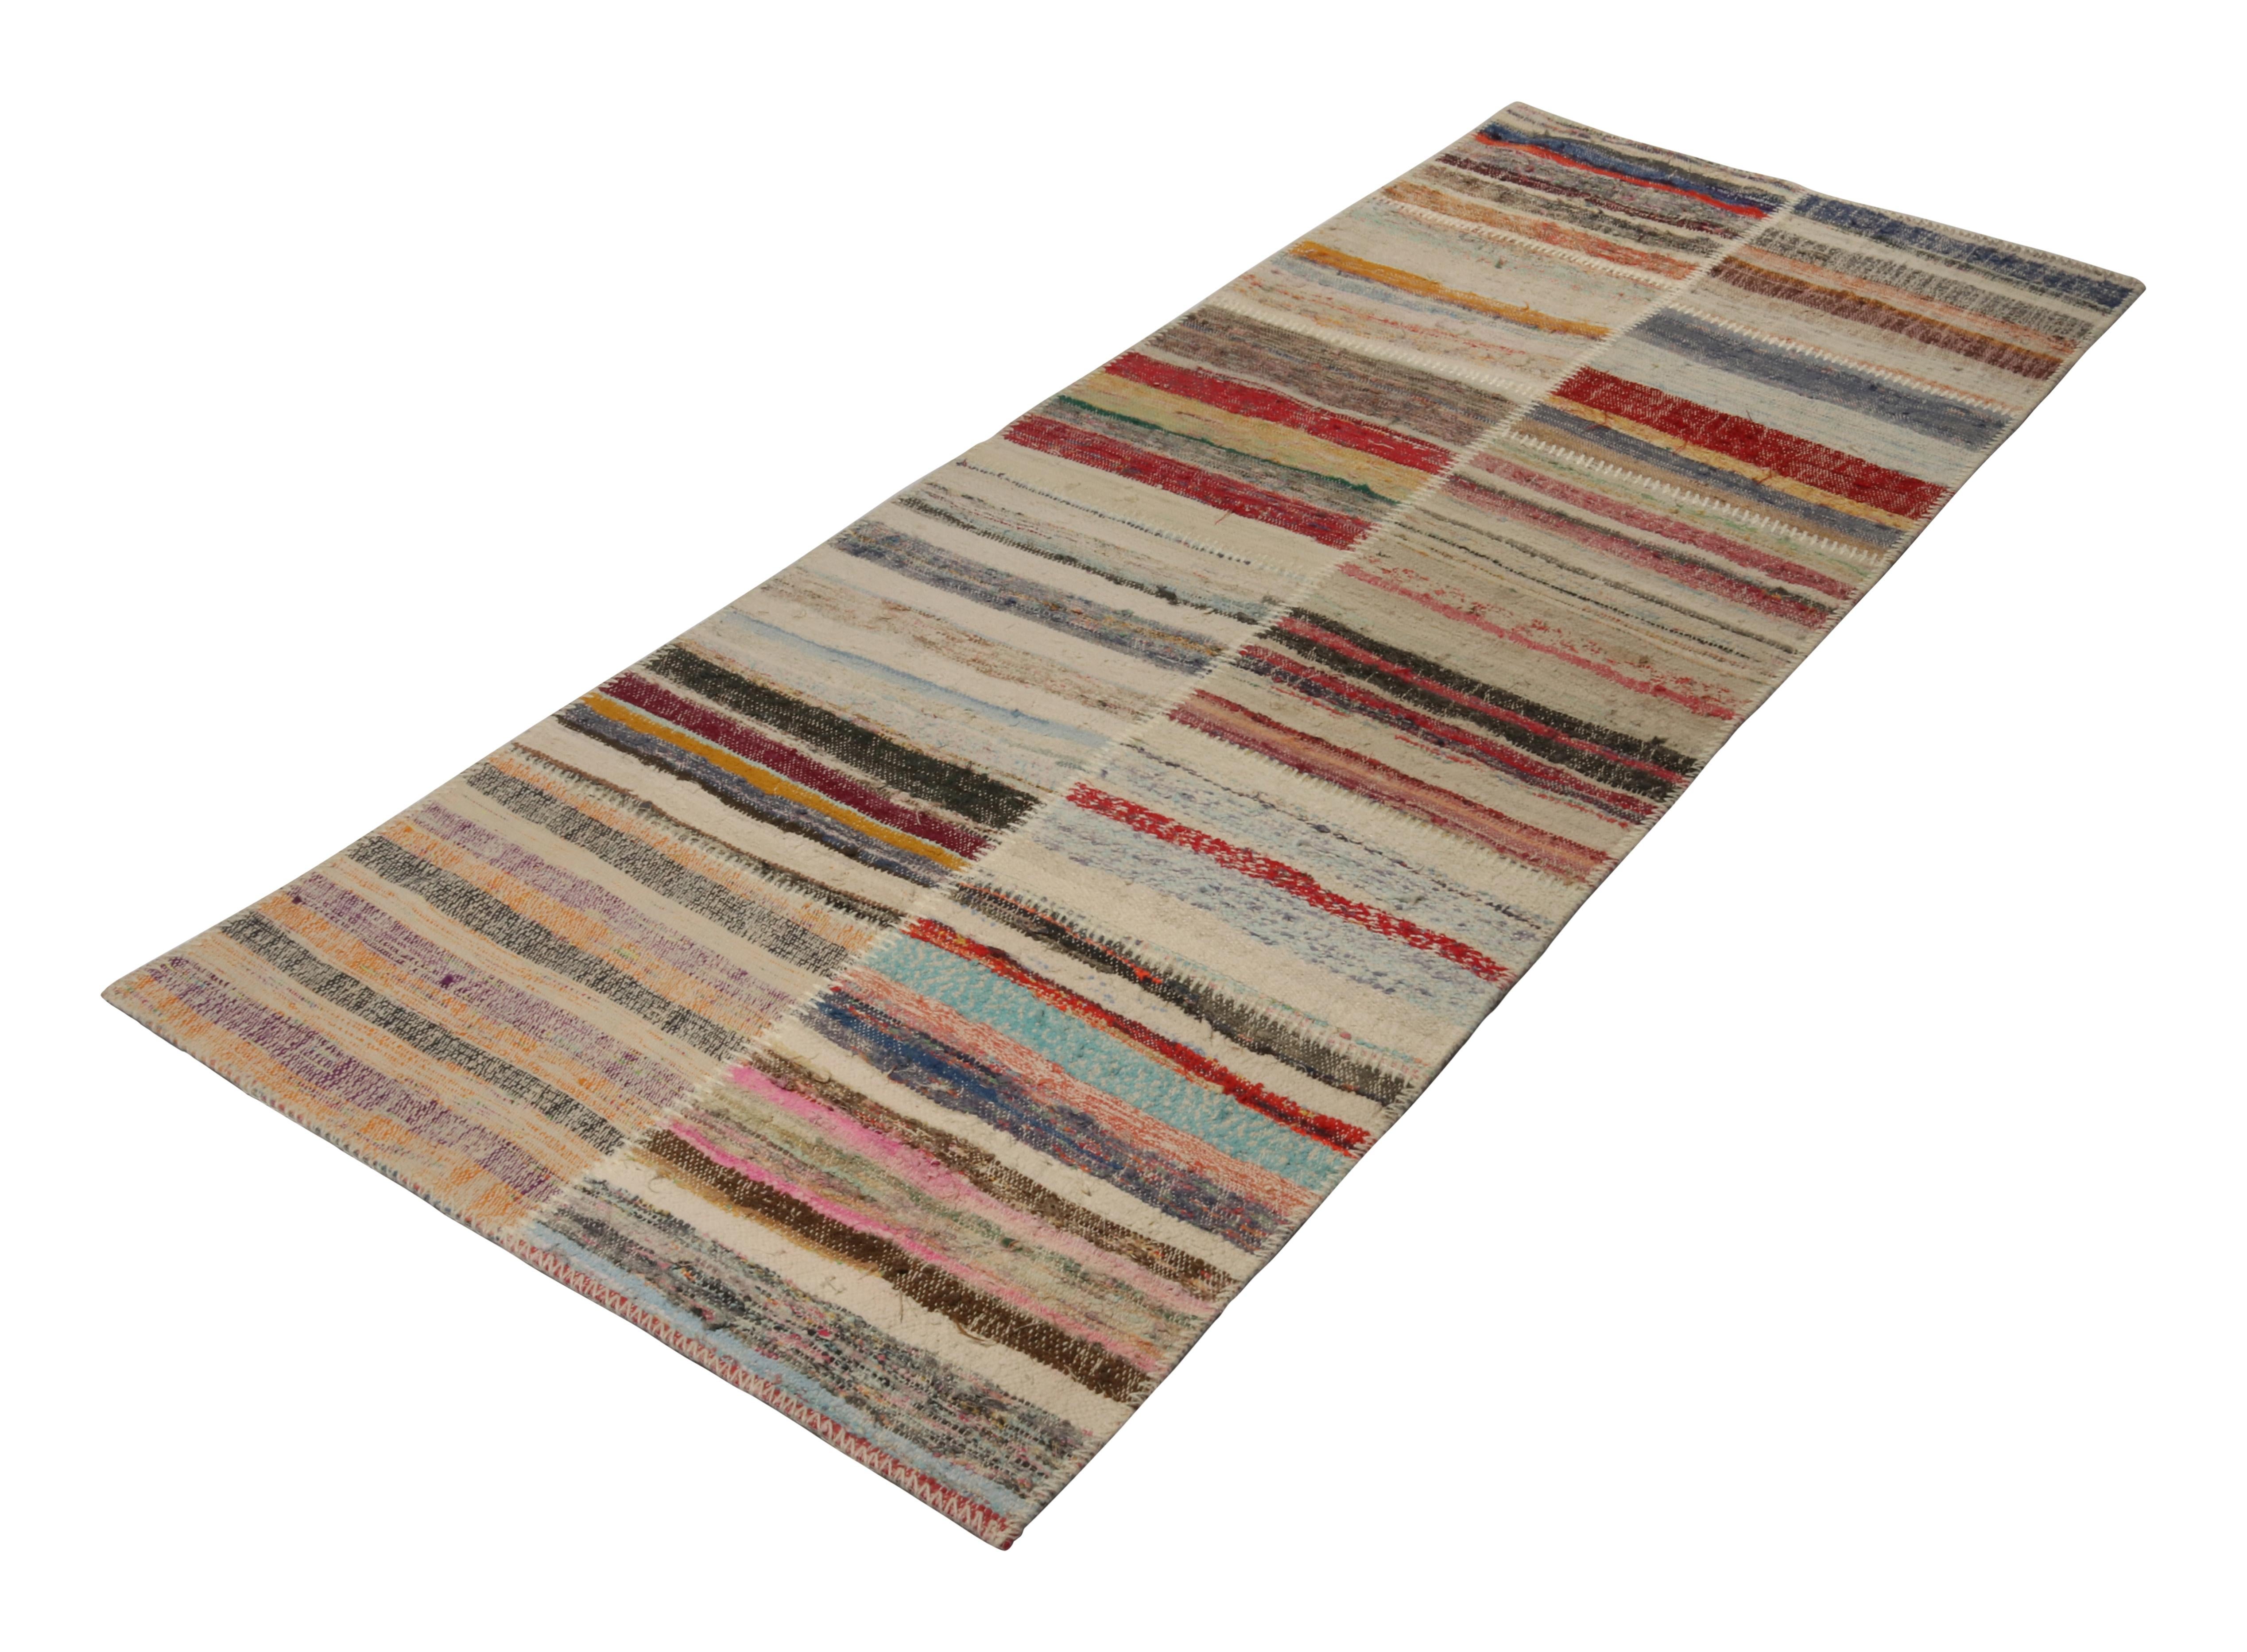 Handwoven in wool, Rug & Kilim presents a 3x8 runner from their innovative new patchwork kilim collection. 

On the Design: 

This flat weave technique repurposes vintage yarns in polychromatic stripes and striae, achieving a playful look with